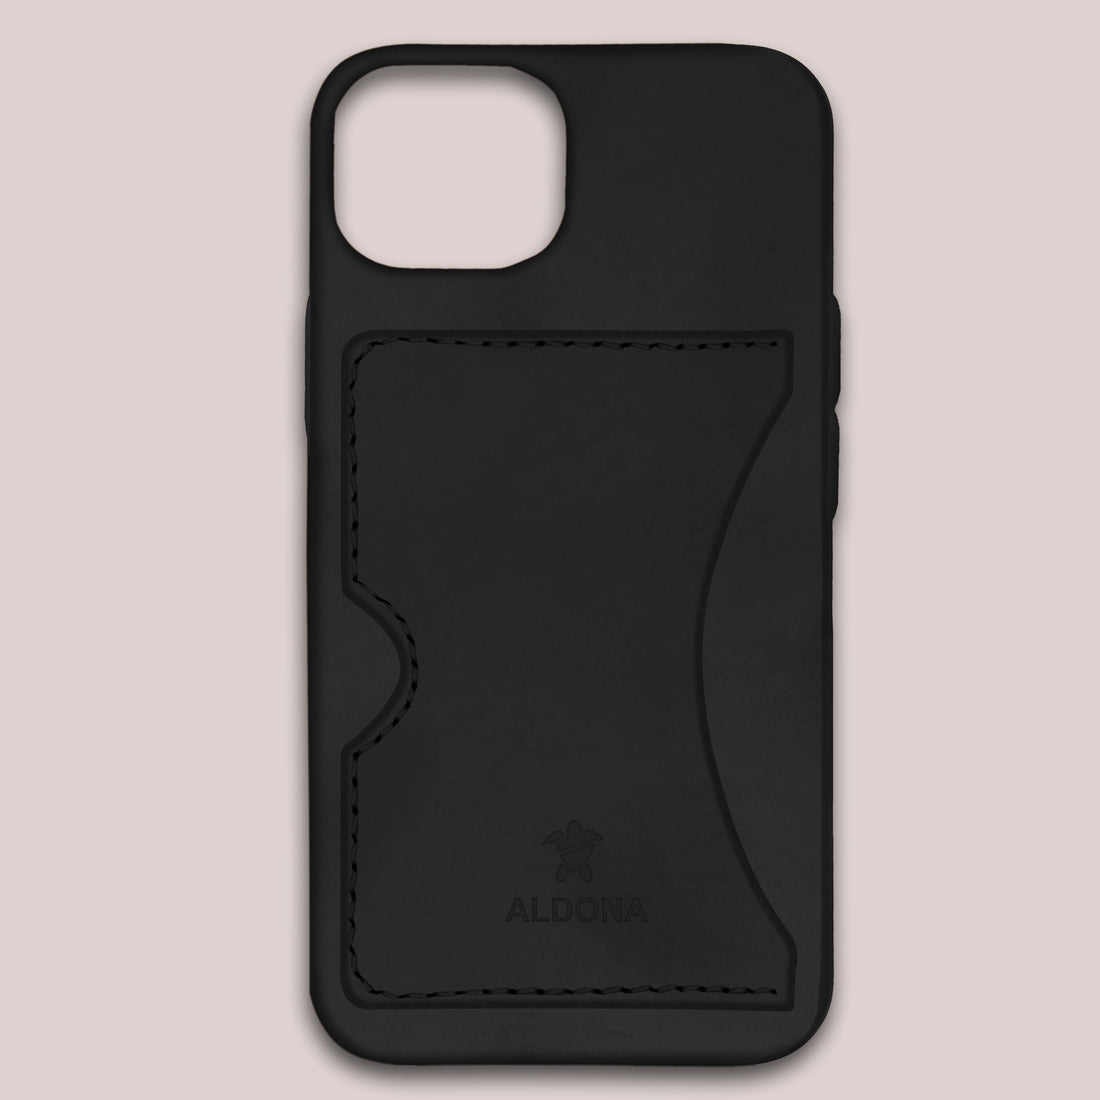 Baxter Card Case for iPhone 13 Pro Max - Onyx Black